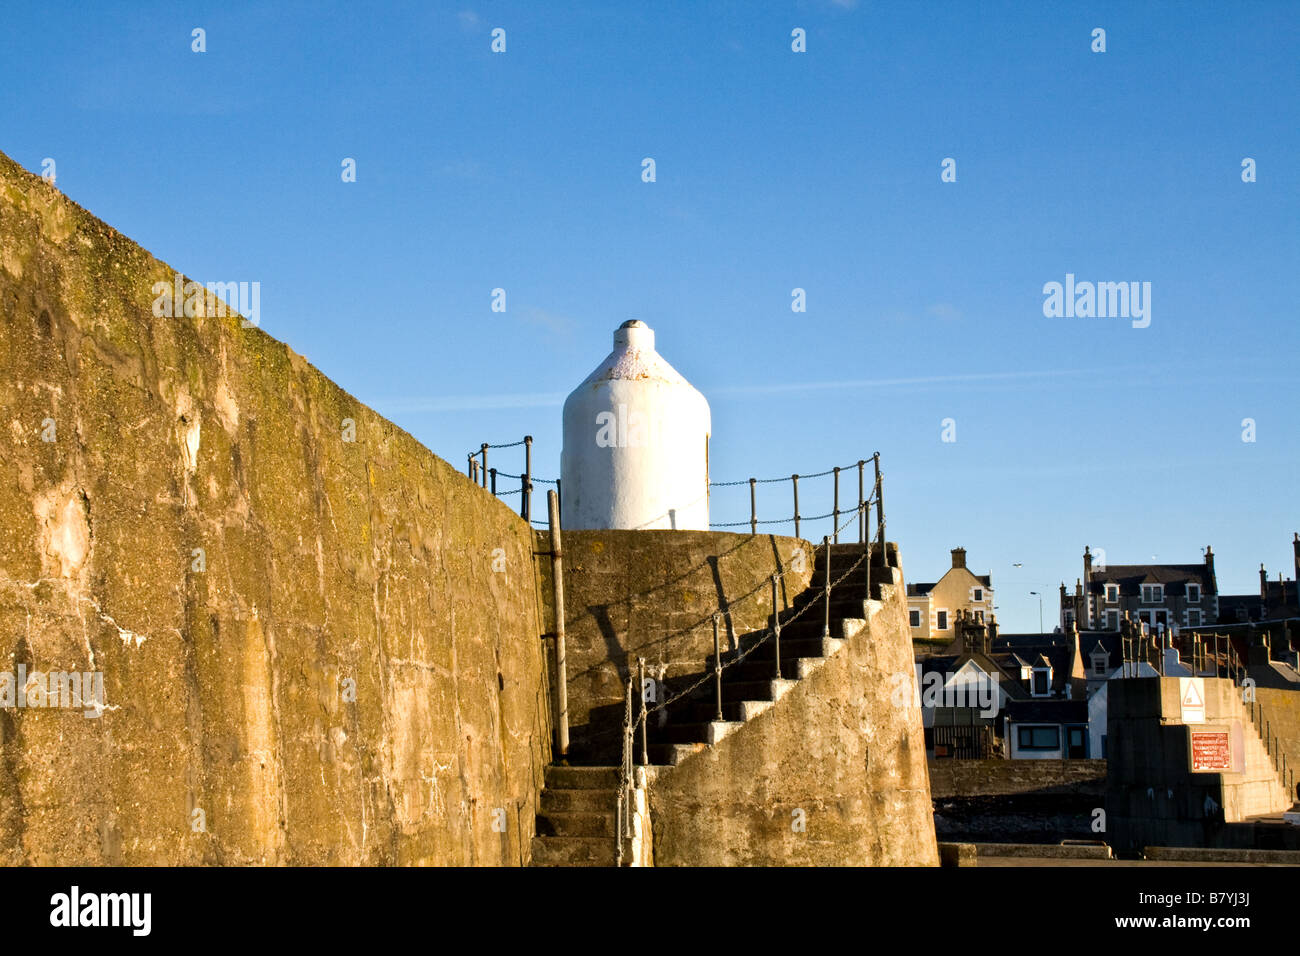 Small signal lamp with spiral staircase by a stone wall in Findochty, Scotland Stock Photo